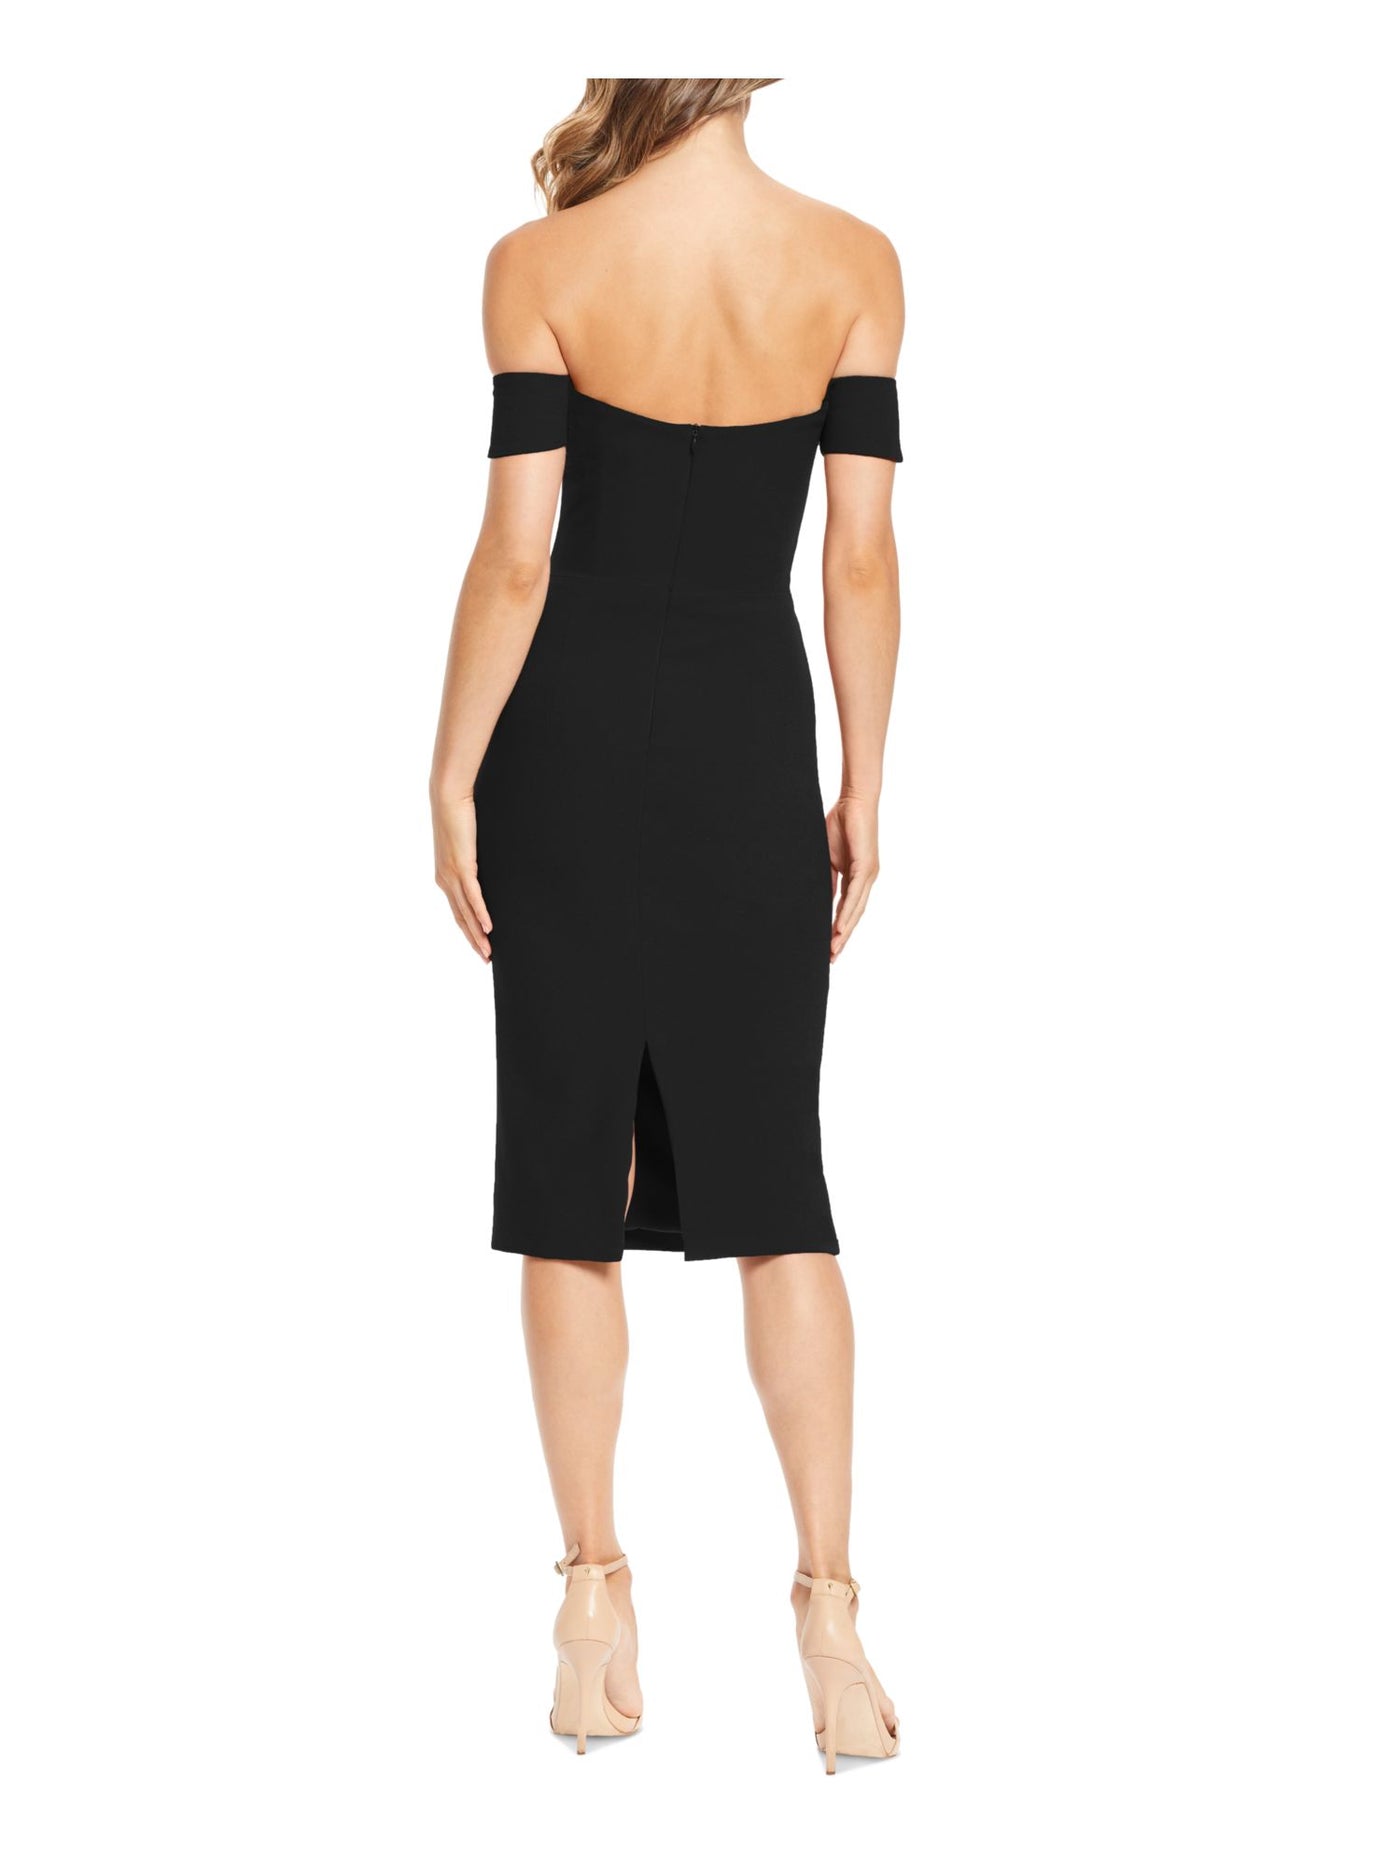 DRESS THE POPULATION Womens Black Zippered Slitted Boned Bodice Back Lined Short Sleeve Off Shoulder Below The Knee Evening Body Con Dress L